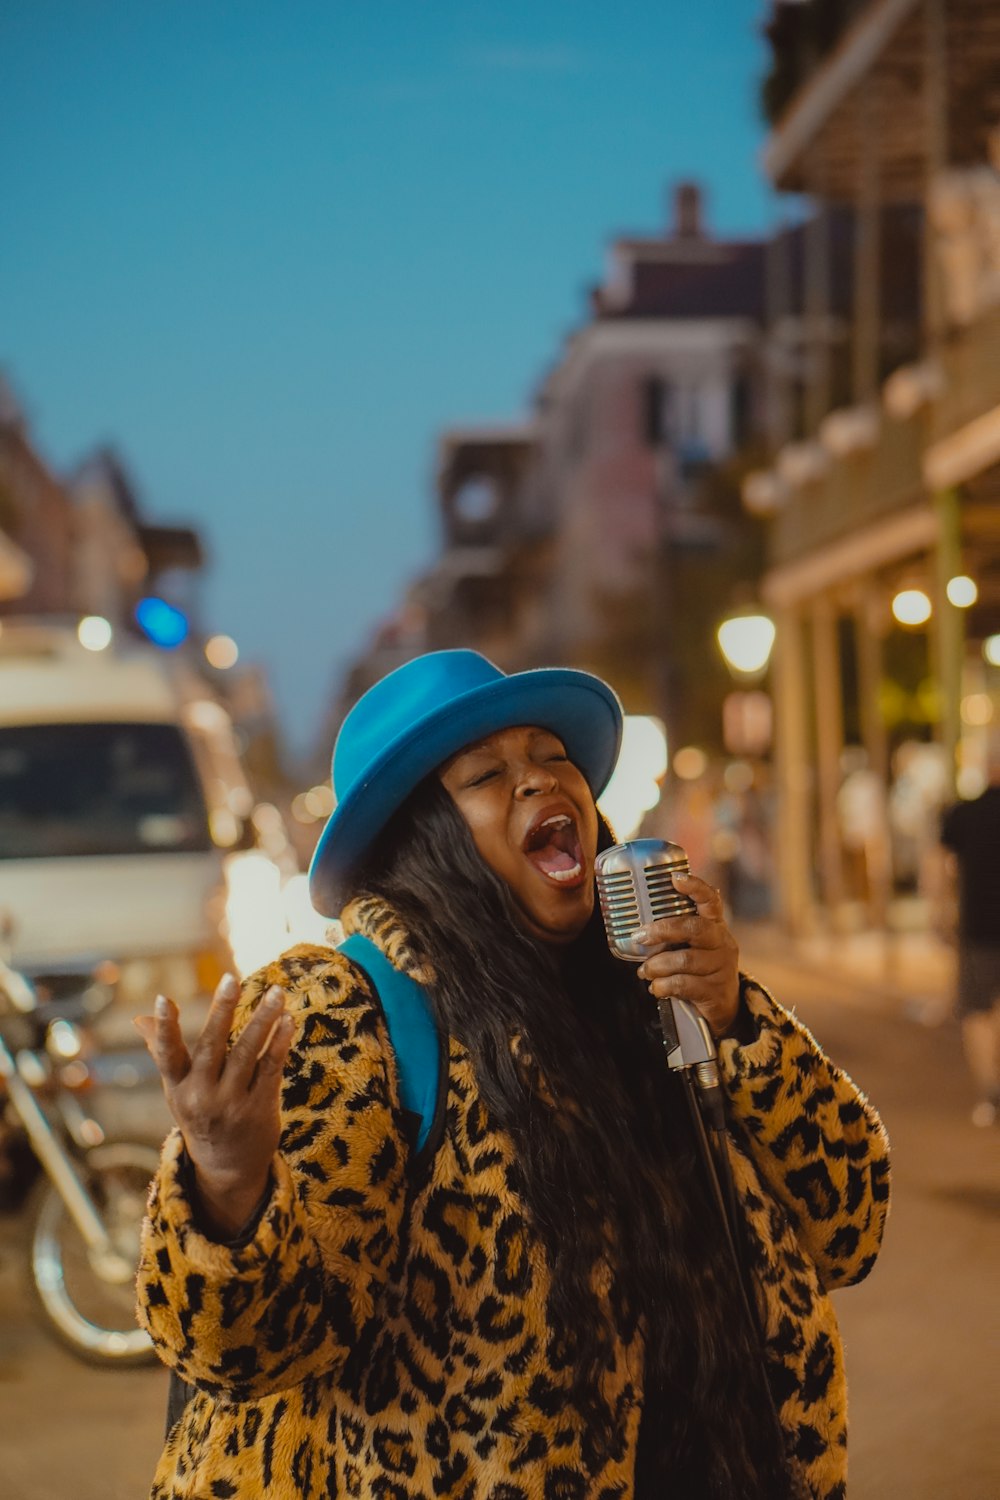 a woman singing into a microphone on a city street